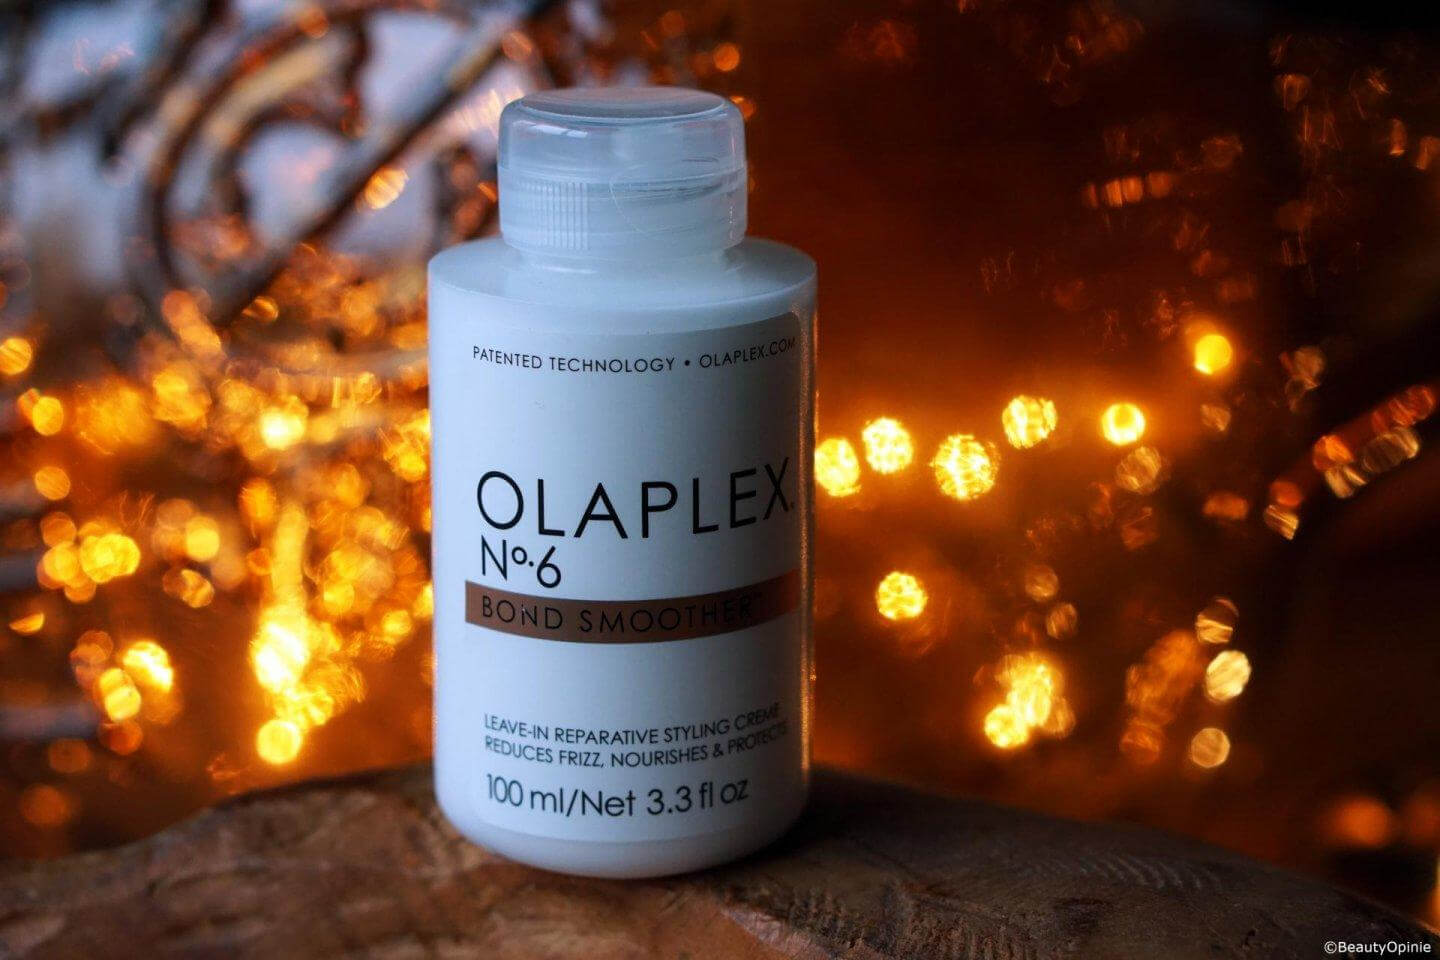 Olaplex-No.-6-Bond-smoother-leave-in-conditioner-review-1440x960